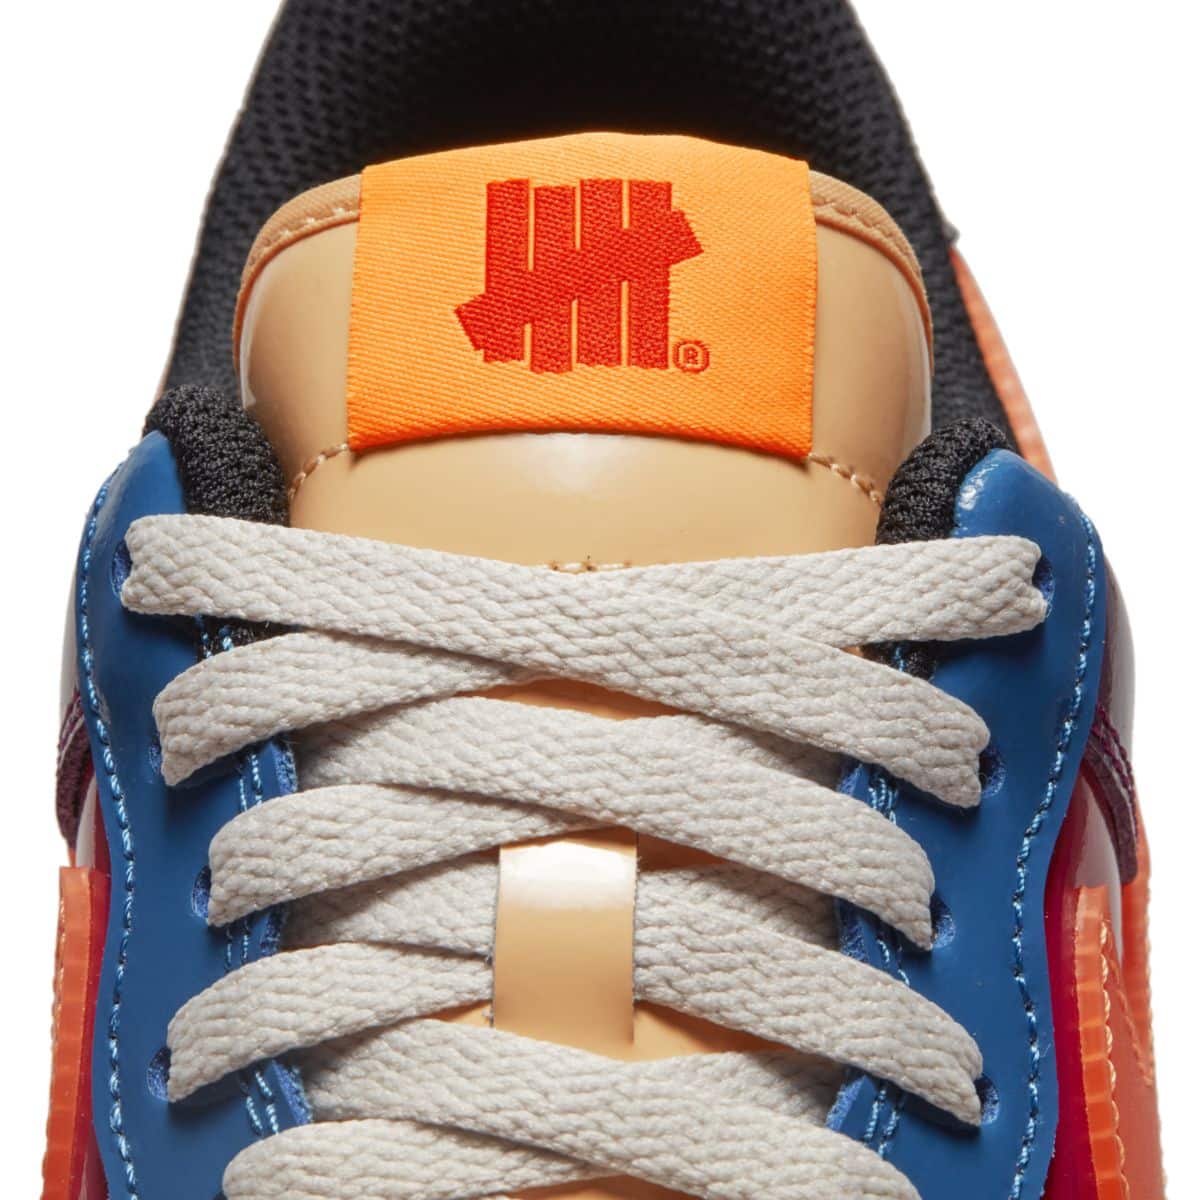 Undefeated x Nike Air Force 1 Low SP Total Orange DV5255-400 9